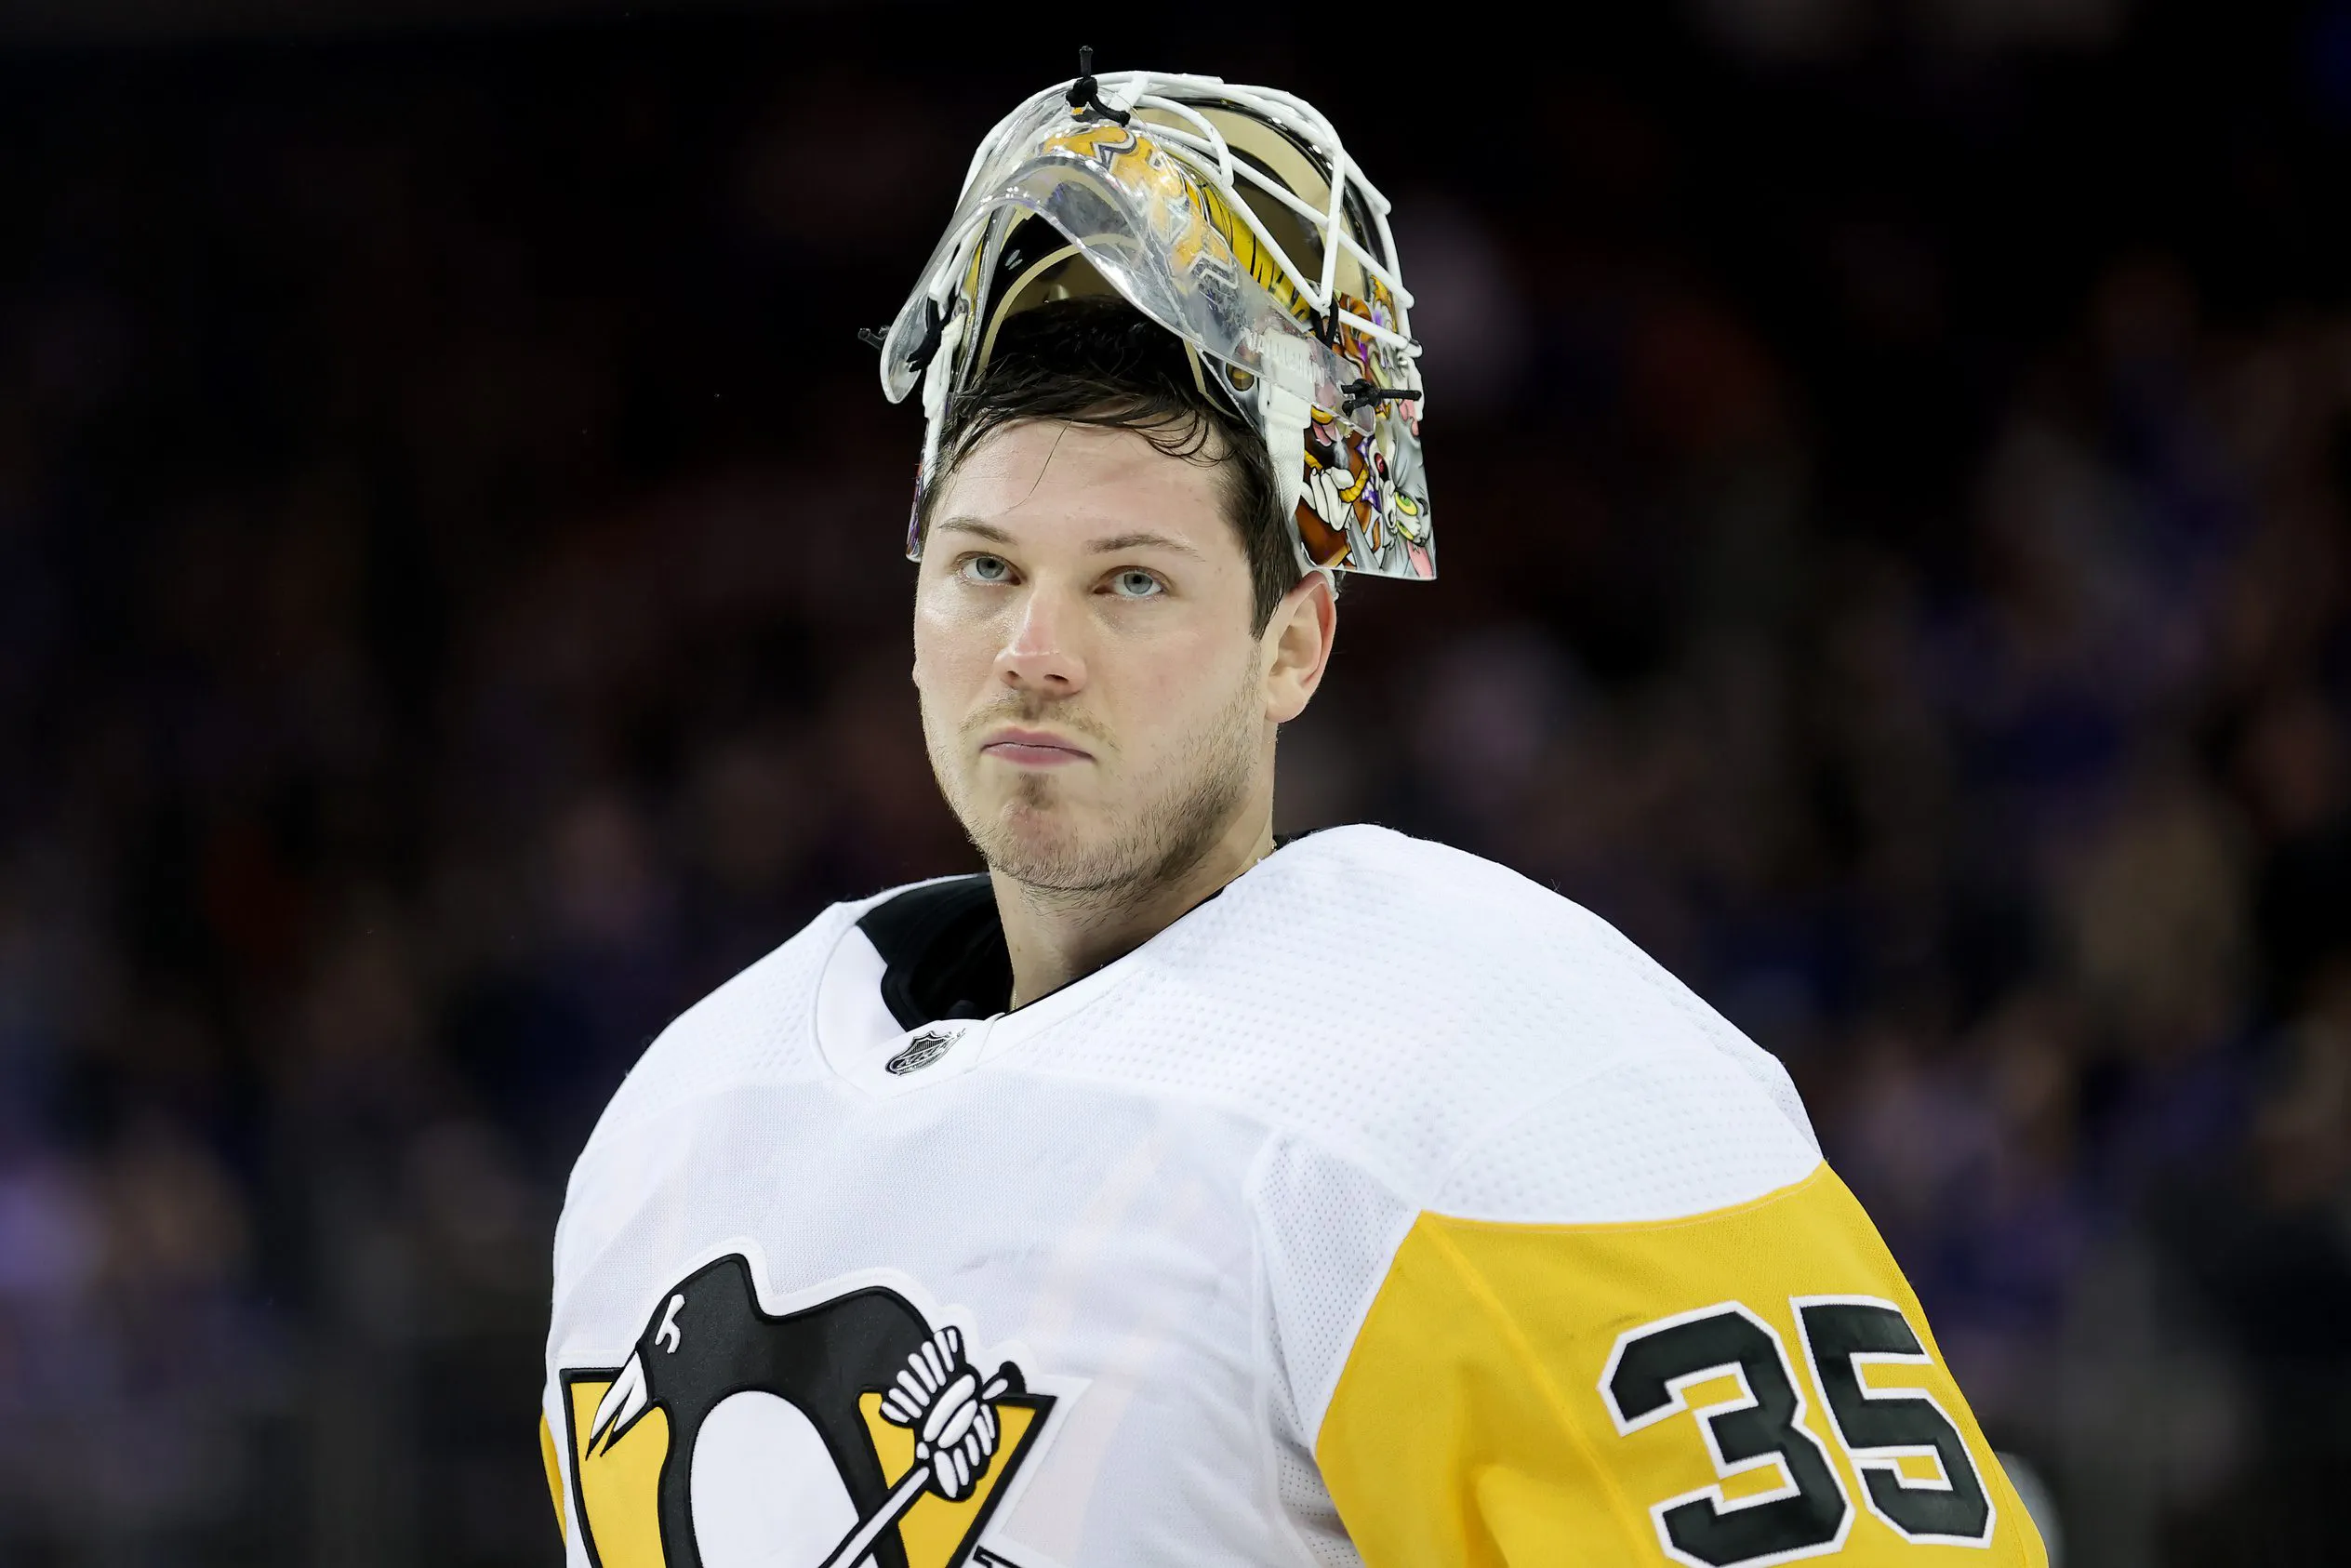 Pittsburgh Penguins goaltender Tristan Jarry to miss Thursday’s game with lower-body injury